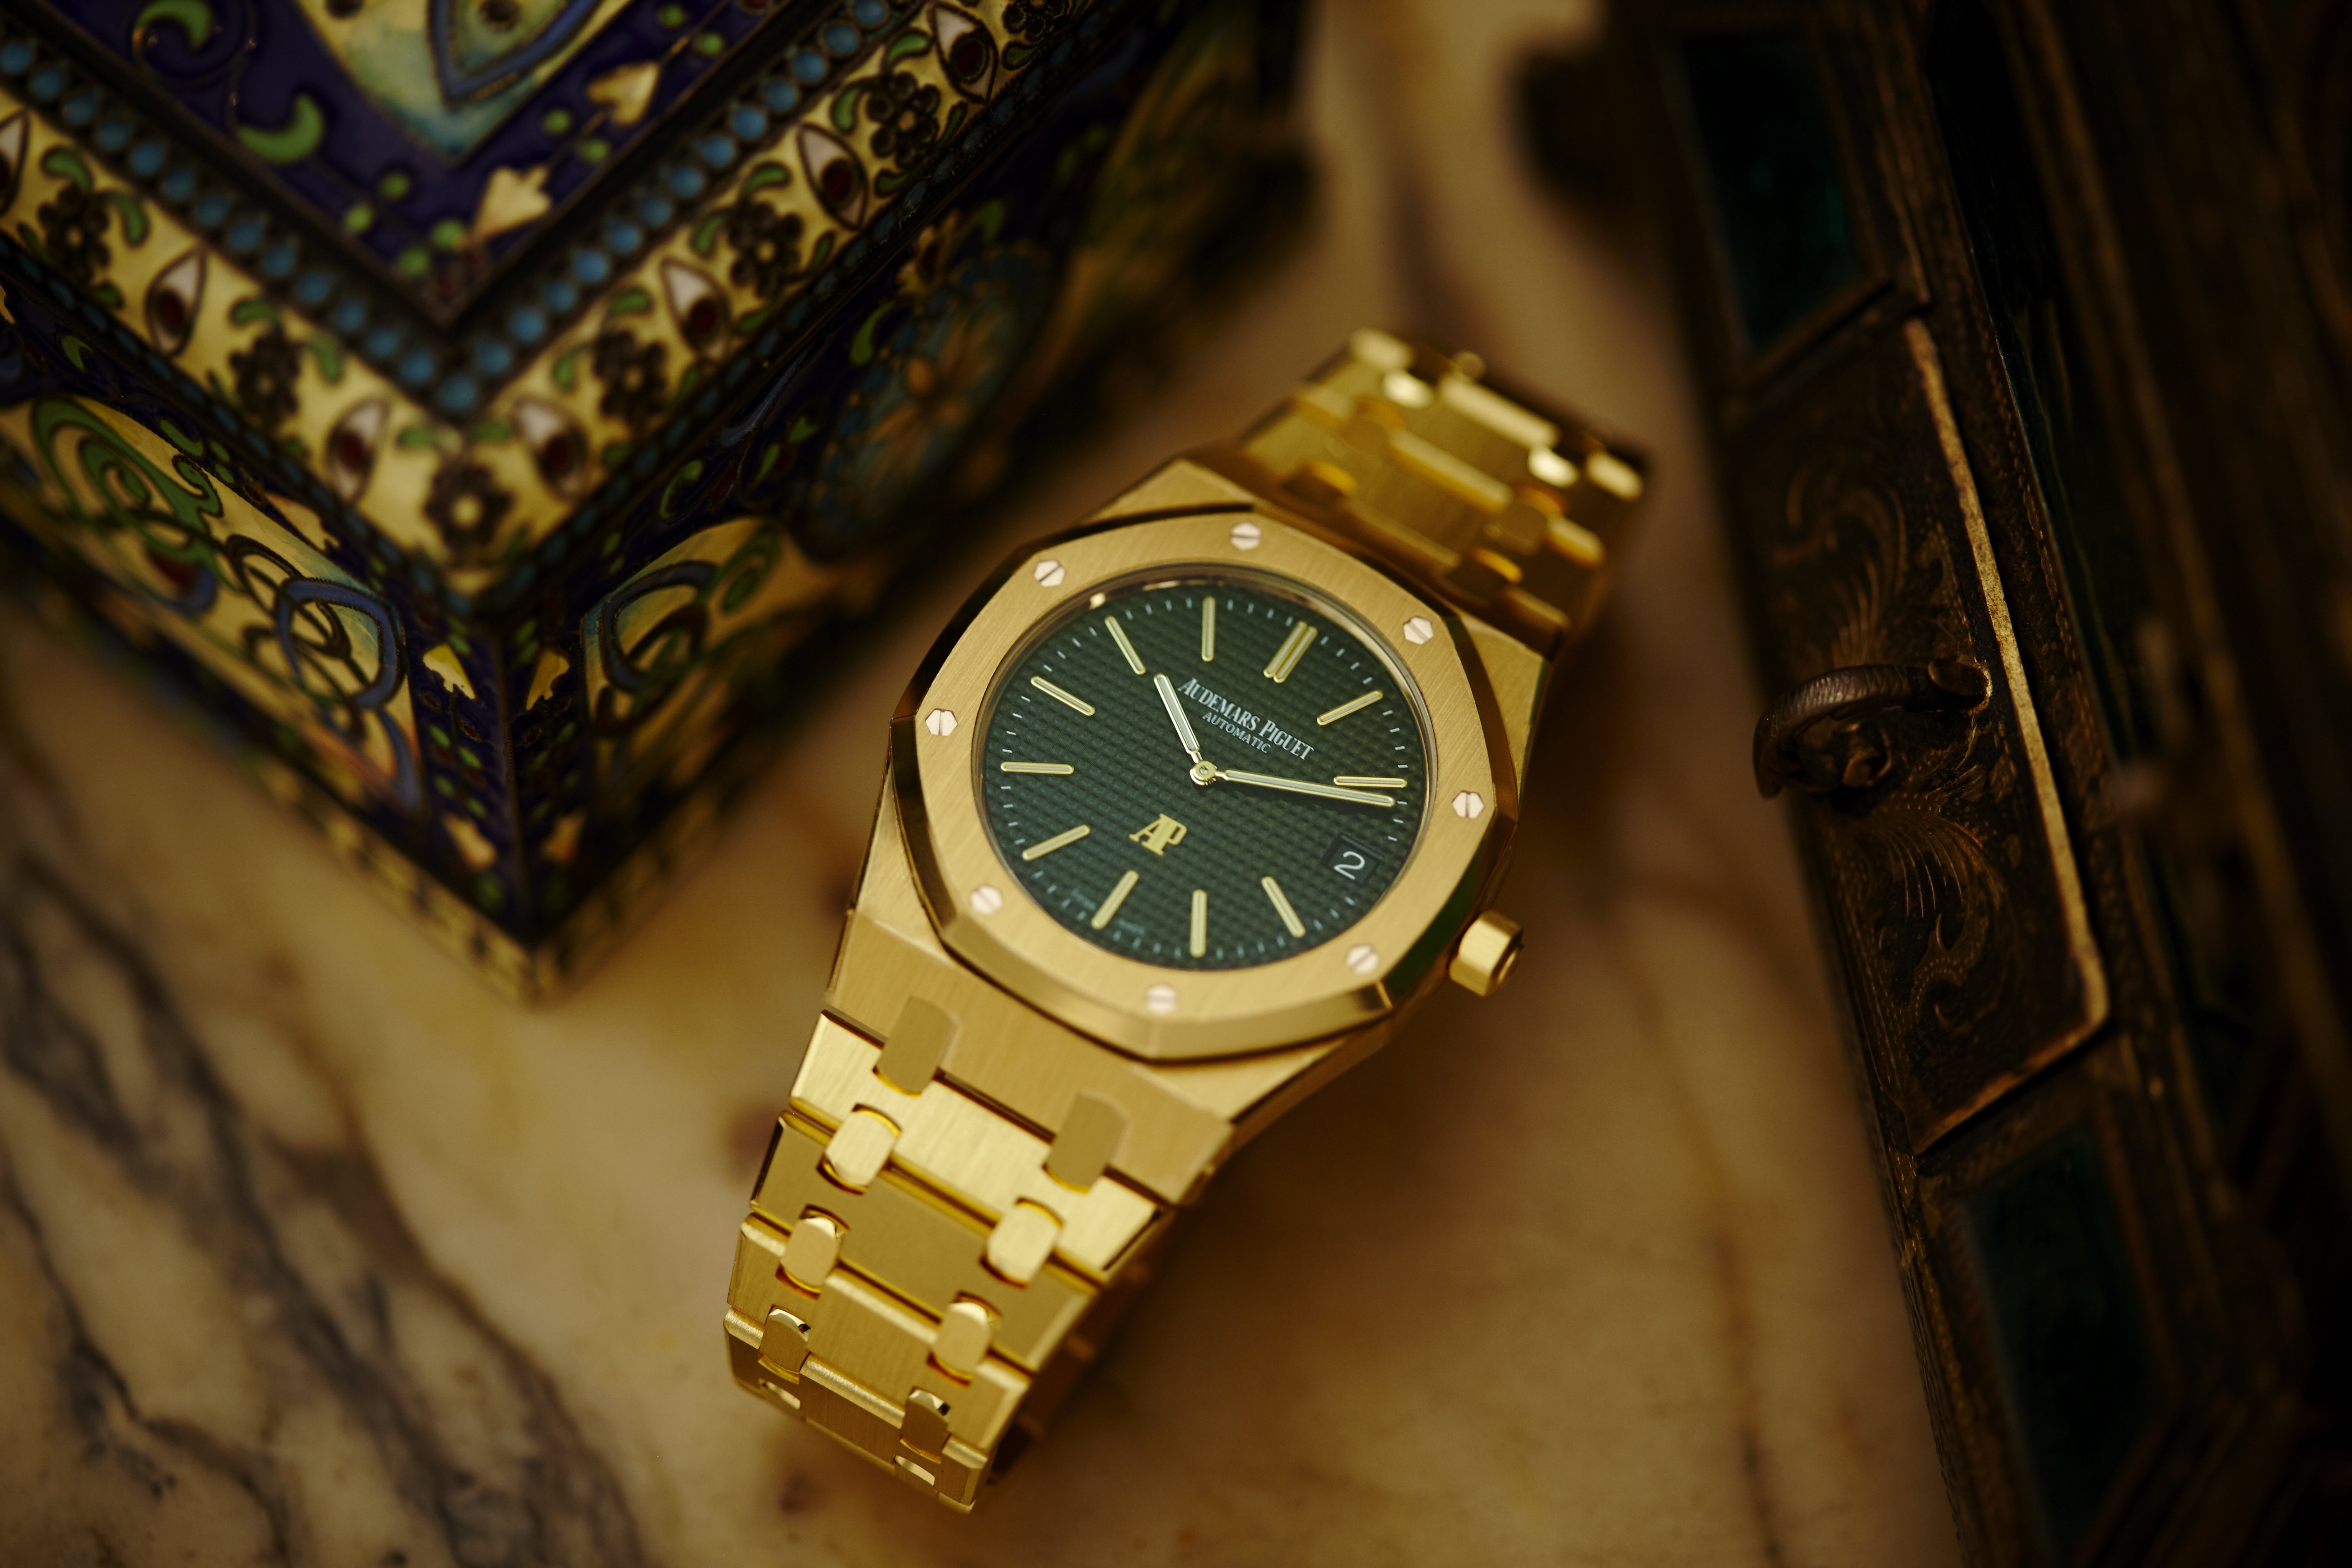 Audemars Piguet Royal Oak Extra-Thin 18K yellow gold limited edition review